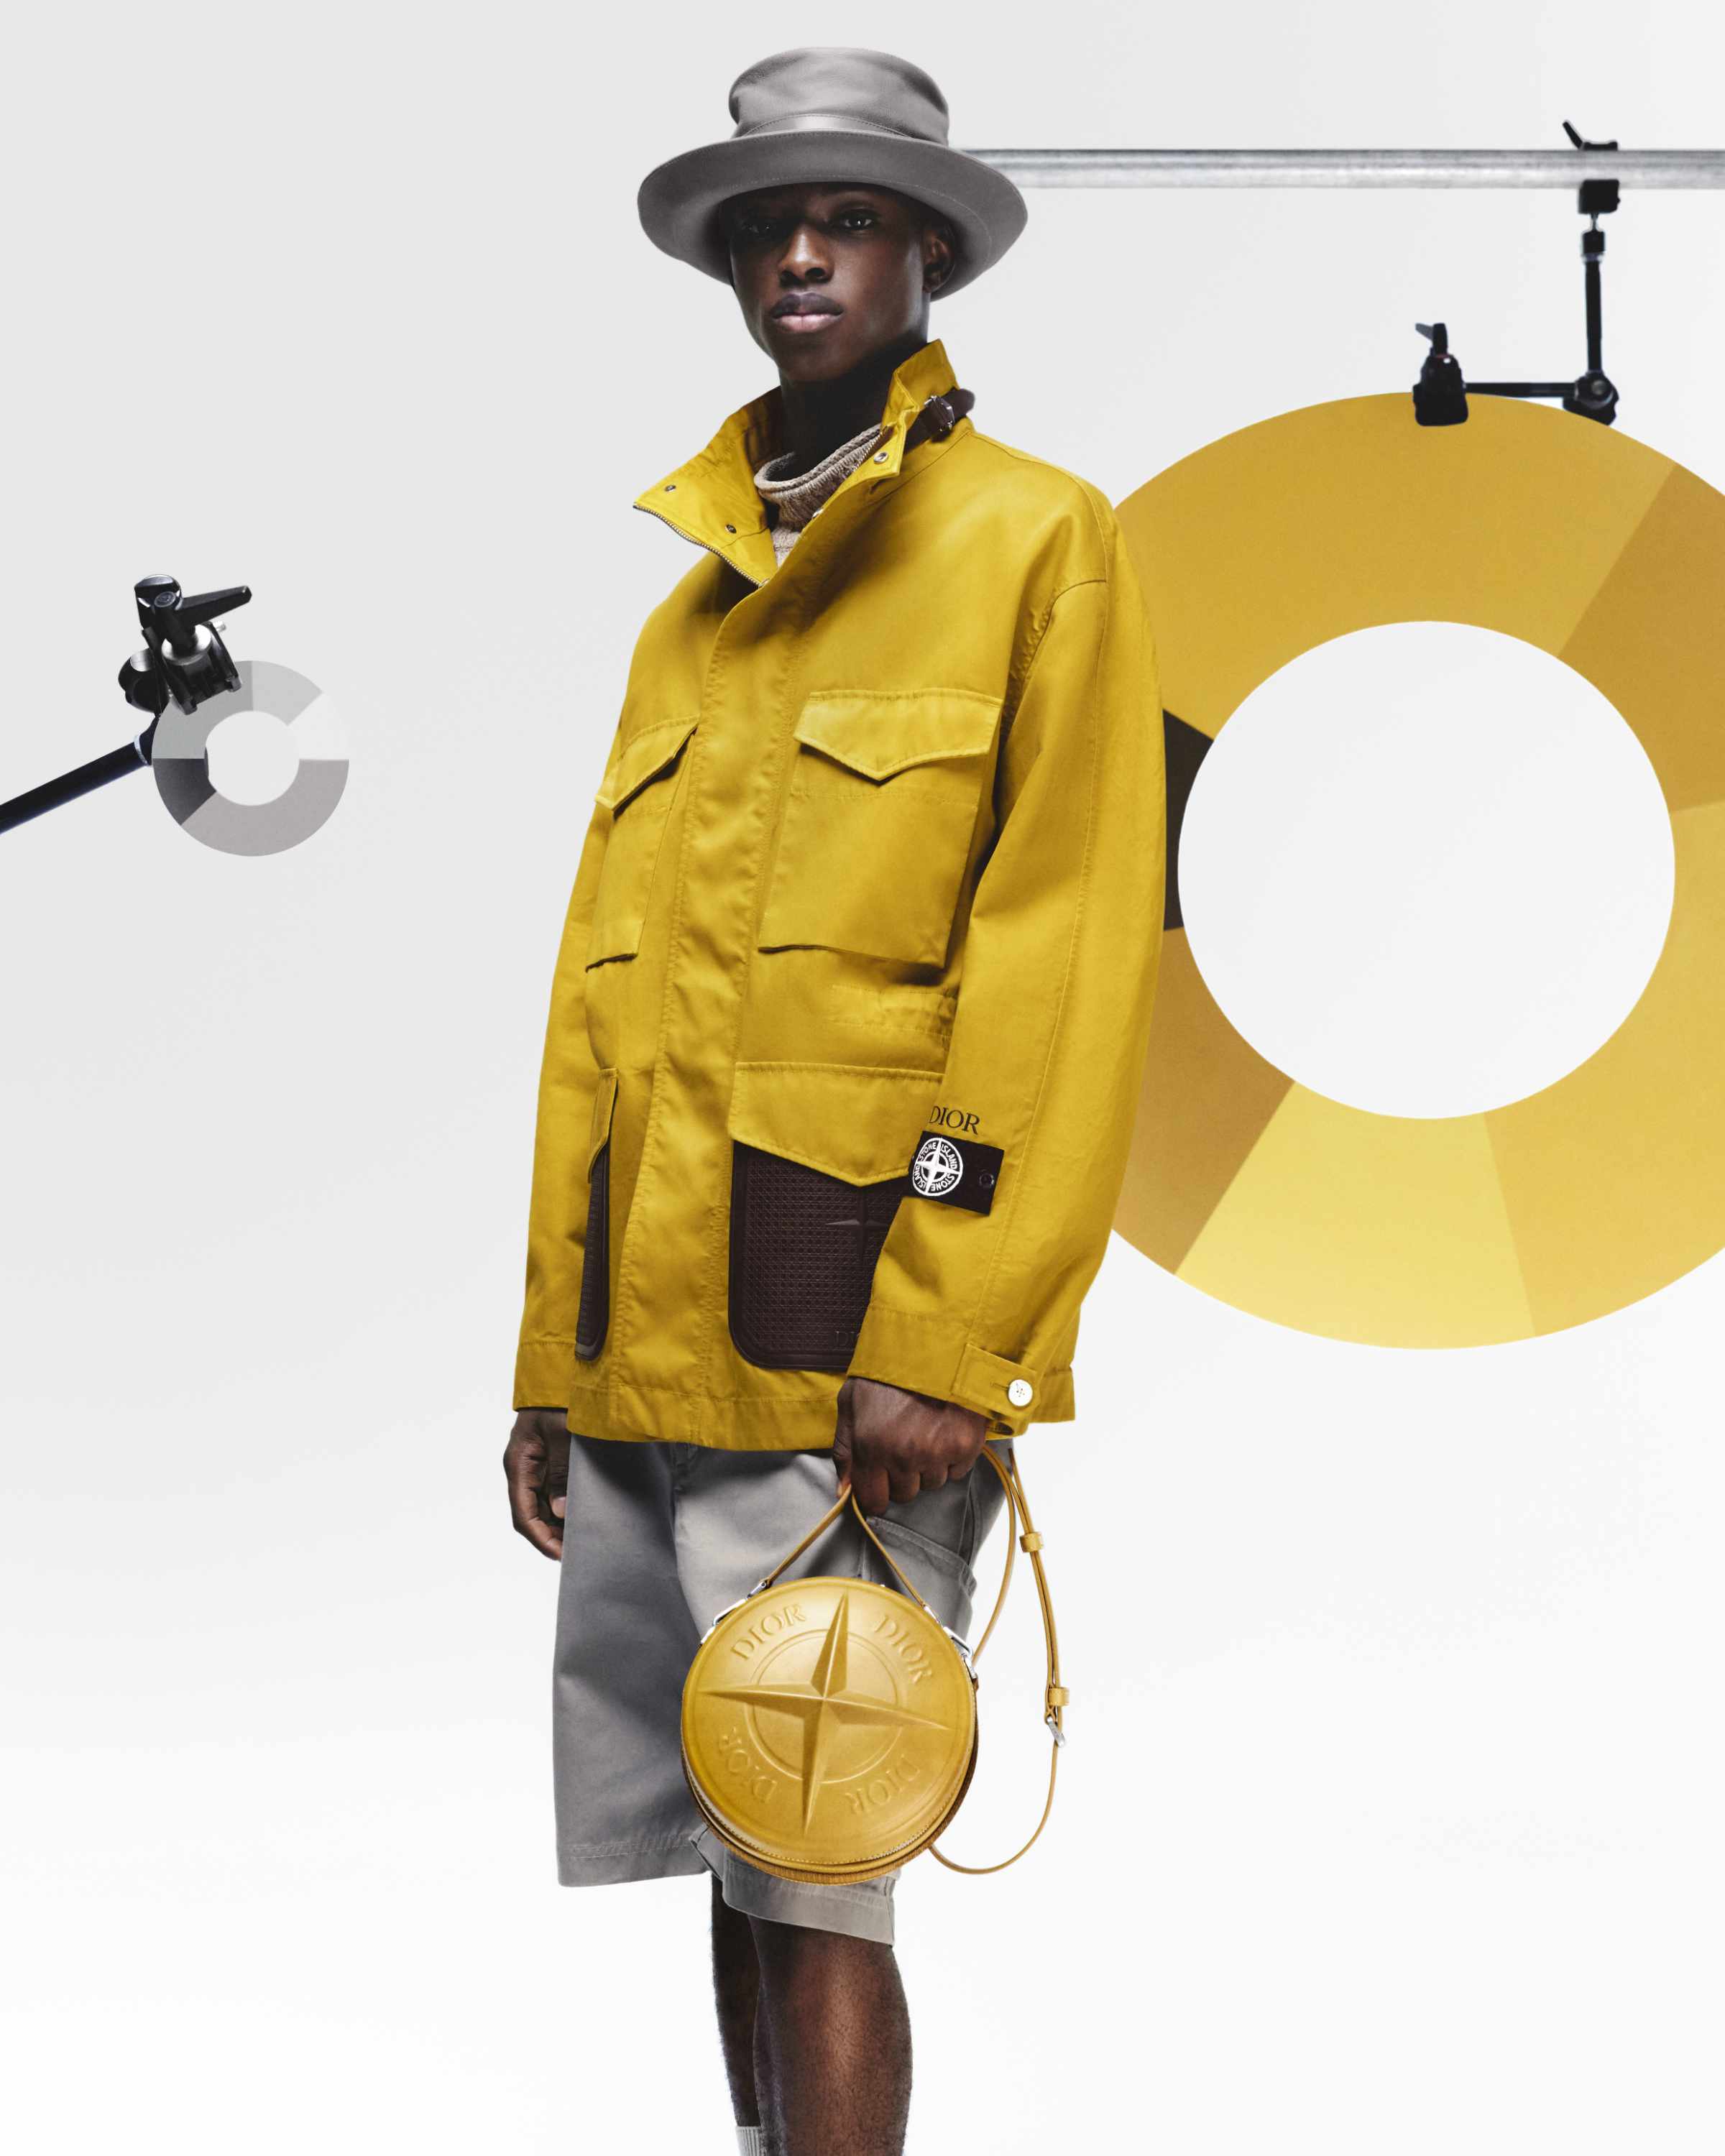 Dior x Stone Island yellow hat, yellow jacket, and yellow shorts with black compass rose badge logo